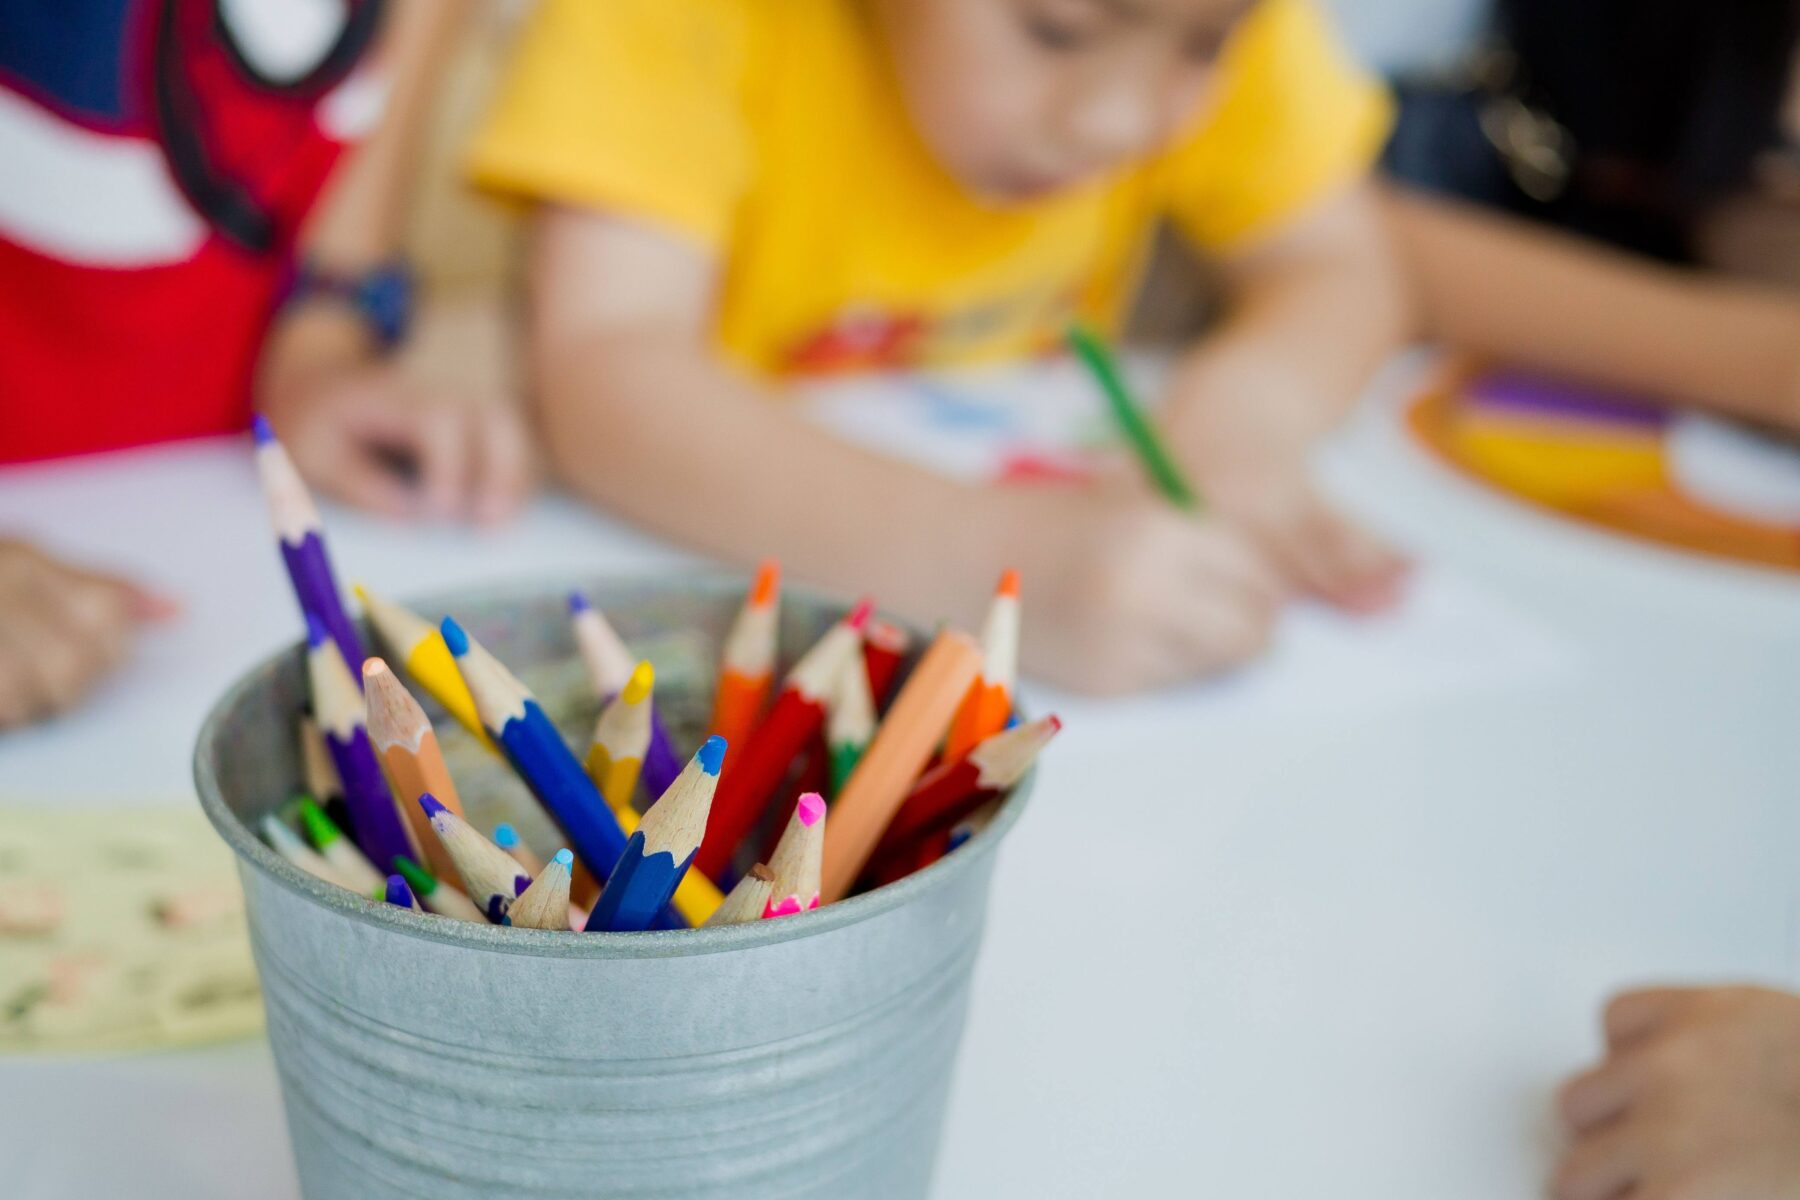 colored pencils in a cup, children coloring in the background